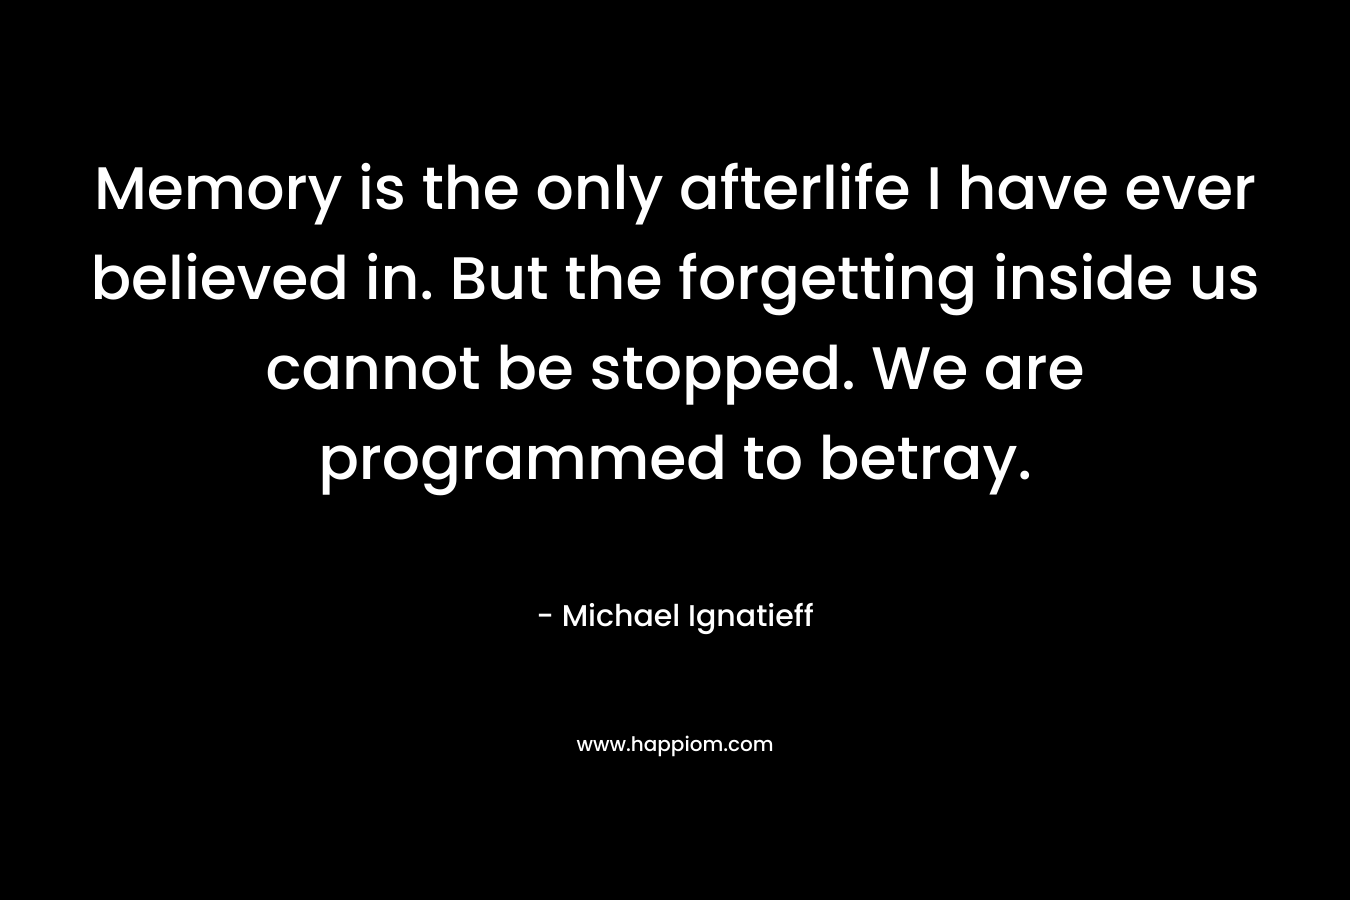 Memory is the only afterlife I have ever believed in. But the forgetting inside us cannot be stopped. We are programmed to betray. – Michael Ignatieff